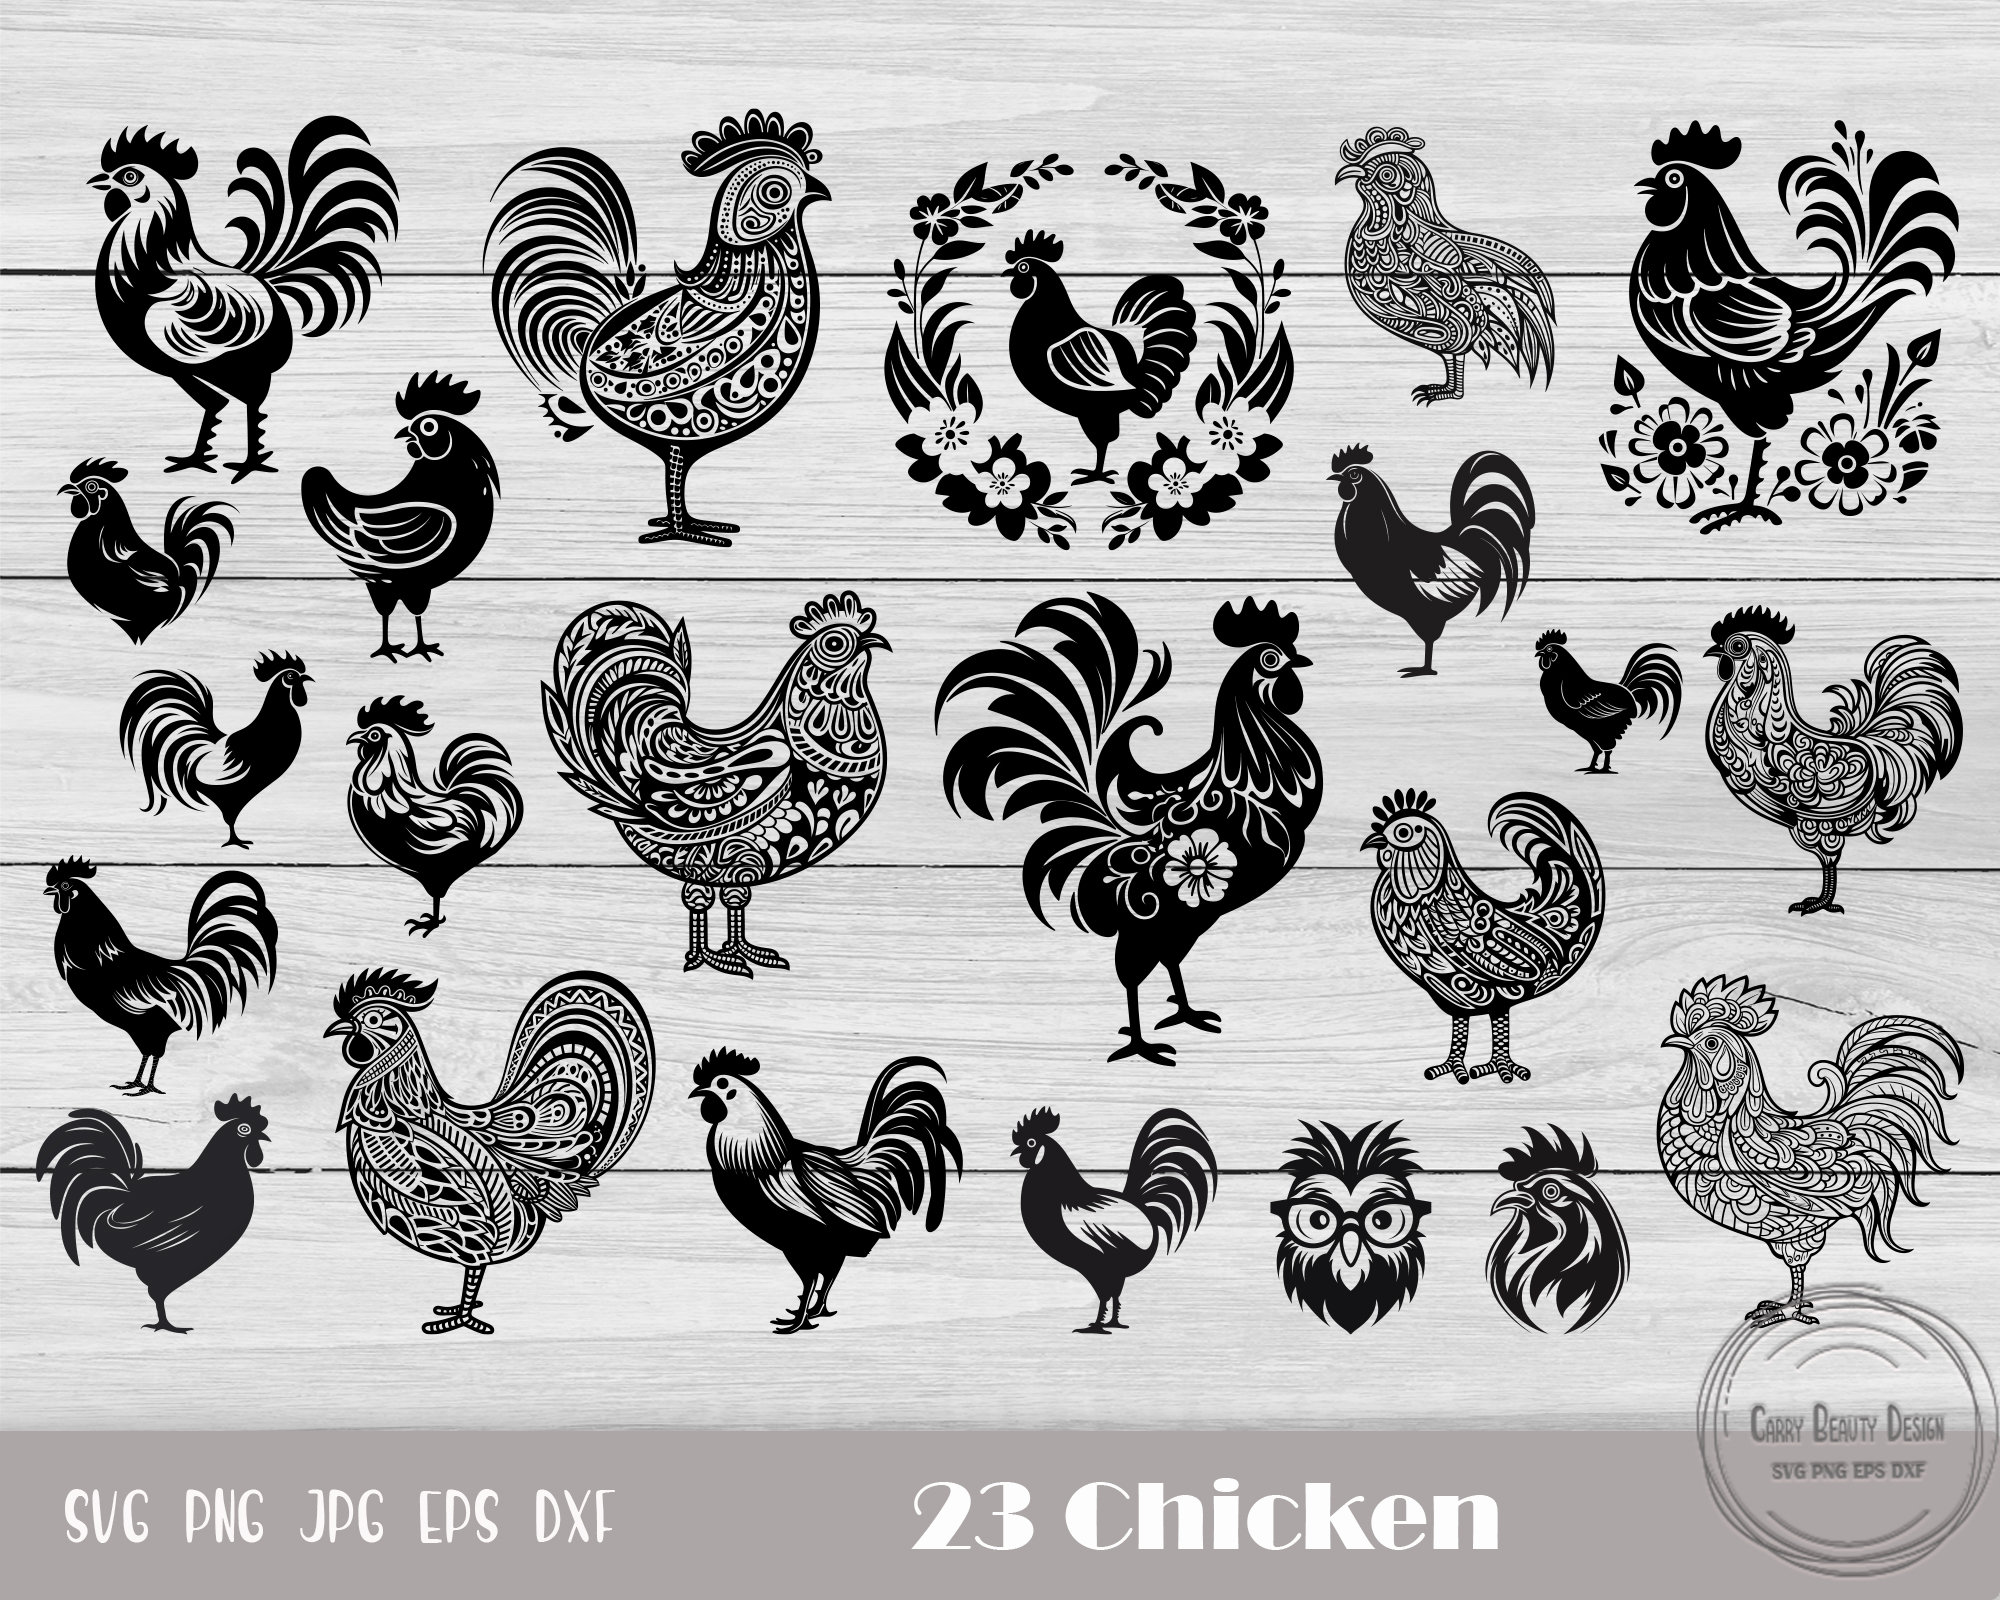 Abstract Rooster Zentangle Chicken Farmyard Country Counted Cross